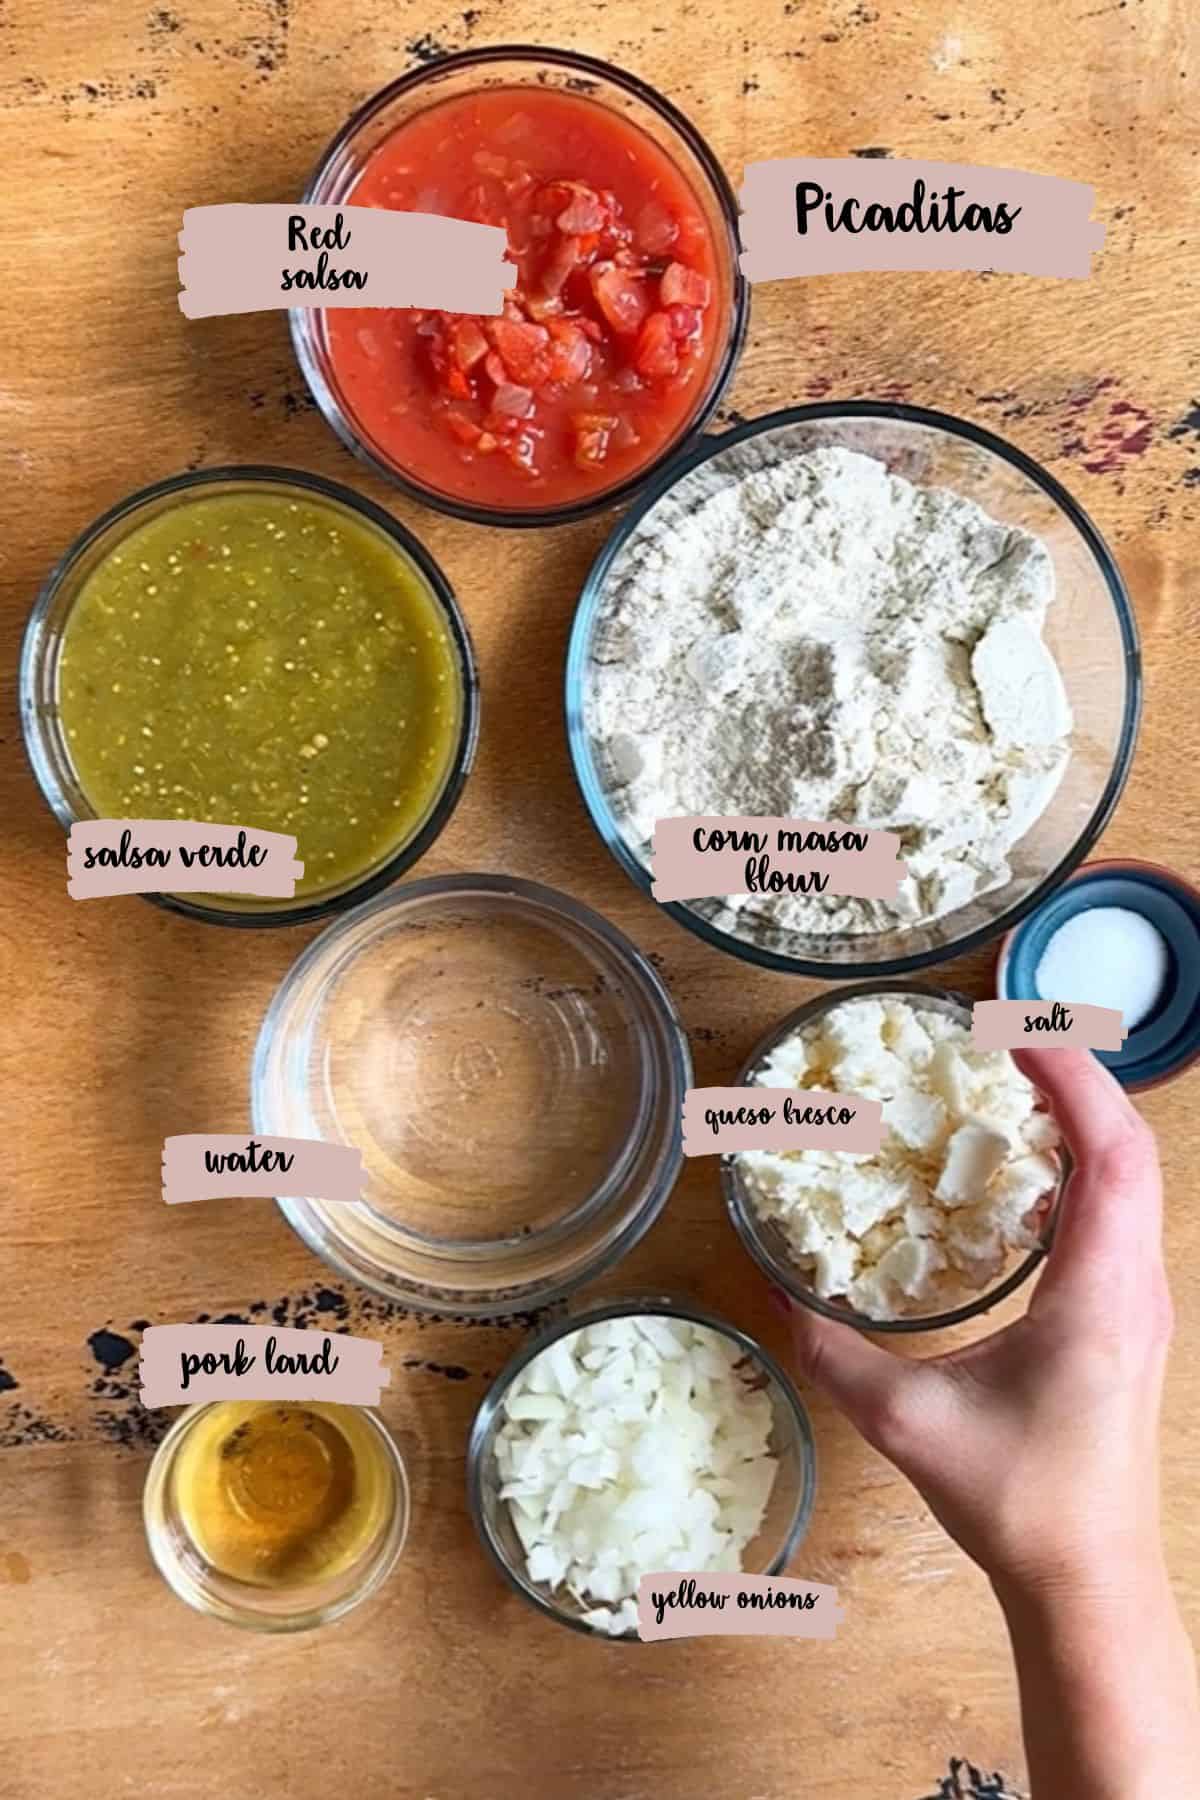 Ingredients shown are used to prepare Picaditas. 